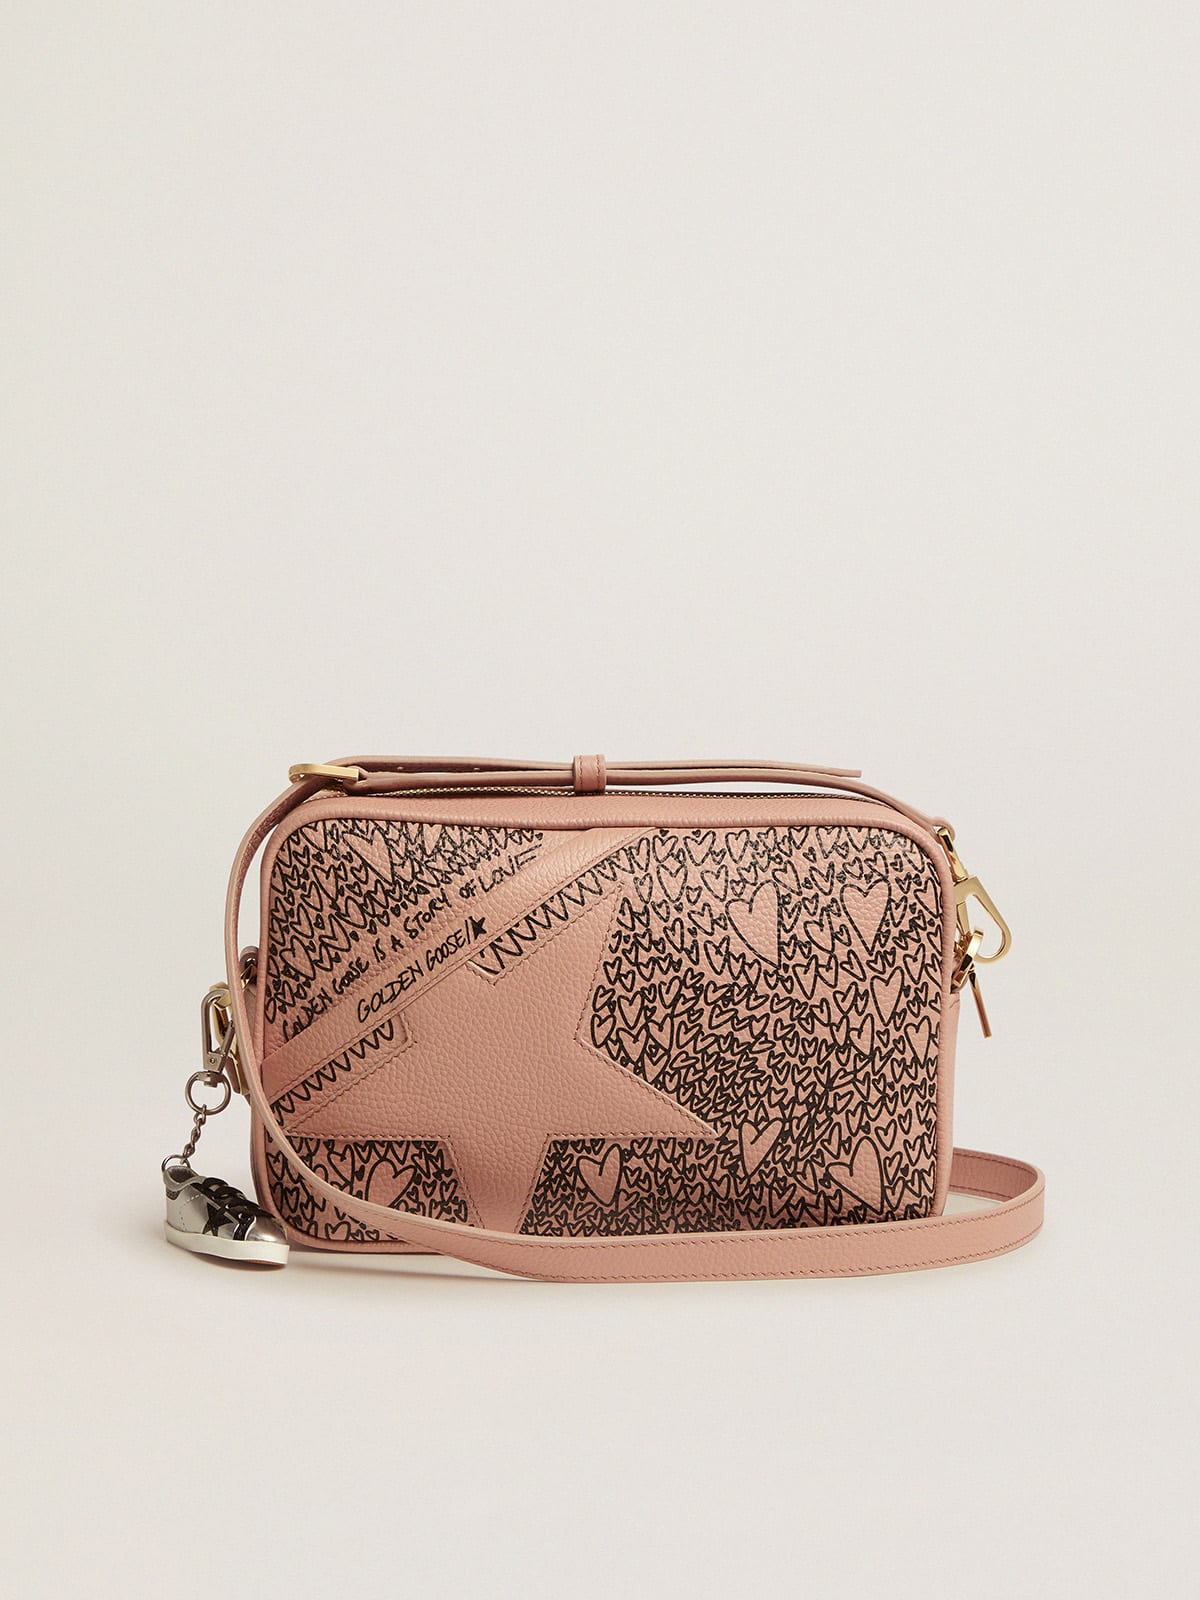 Golden Goose - Nude Star Bag made of hammered leather with love-themed designs in 